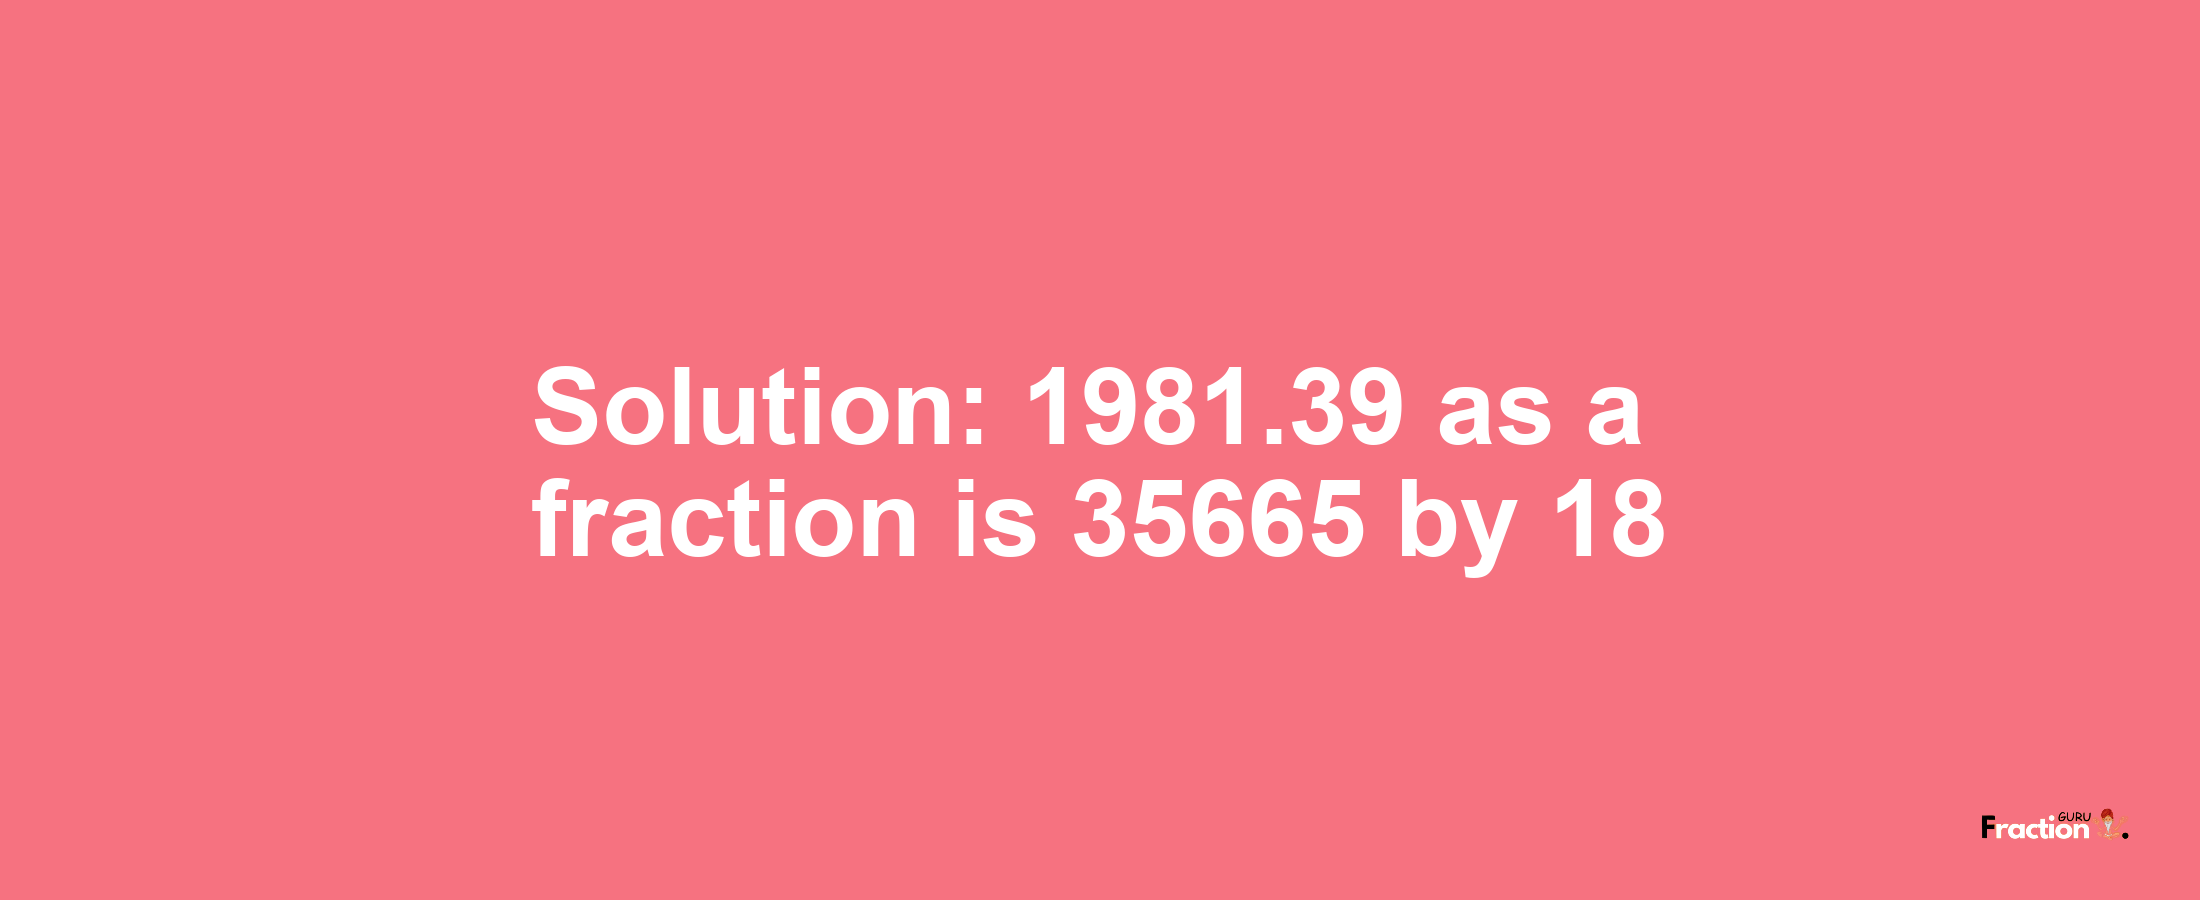 Solution:1981.39 as a fraction is 35665/18